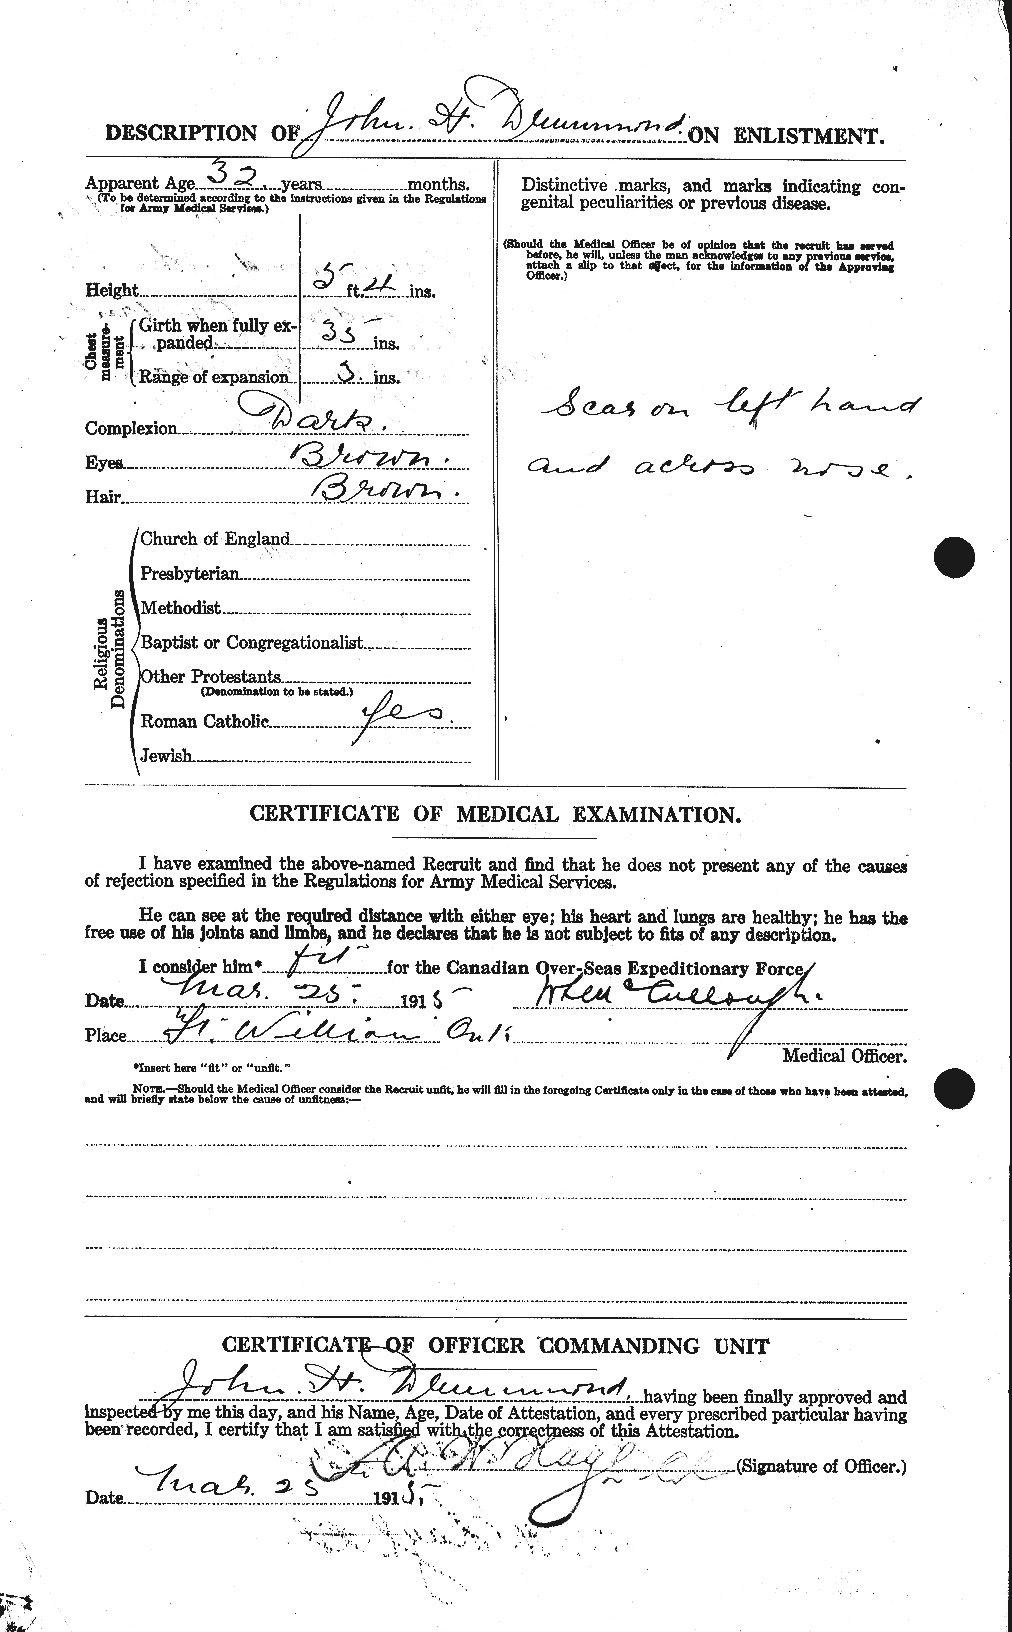 Personnel Records of the First World War - CEF 300910b